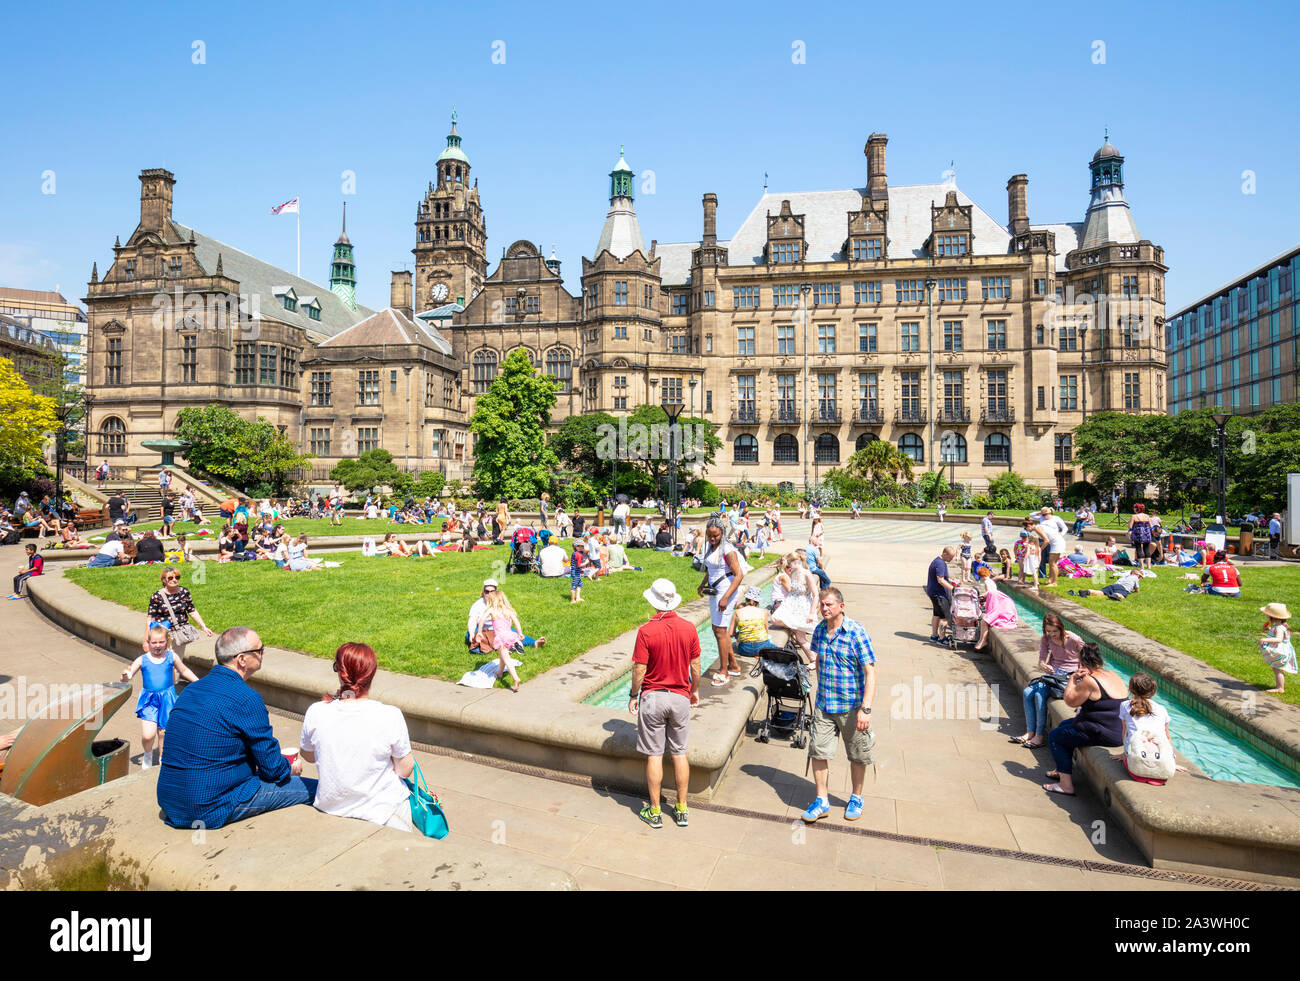 Sheffield city centre town hall and lots of people in the Peace gardens Sheffield city center south yorkshire england gb uk europe Stock Photo